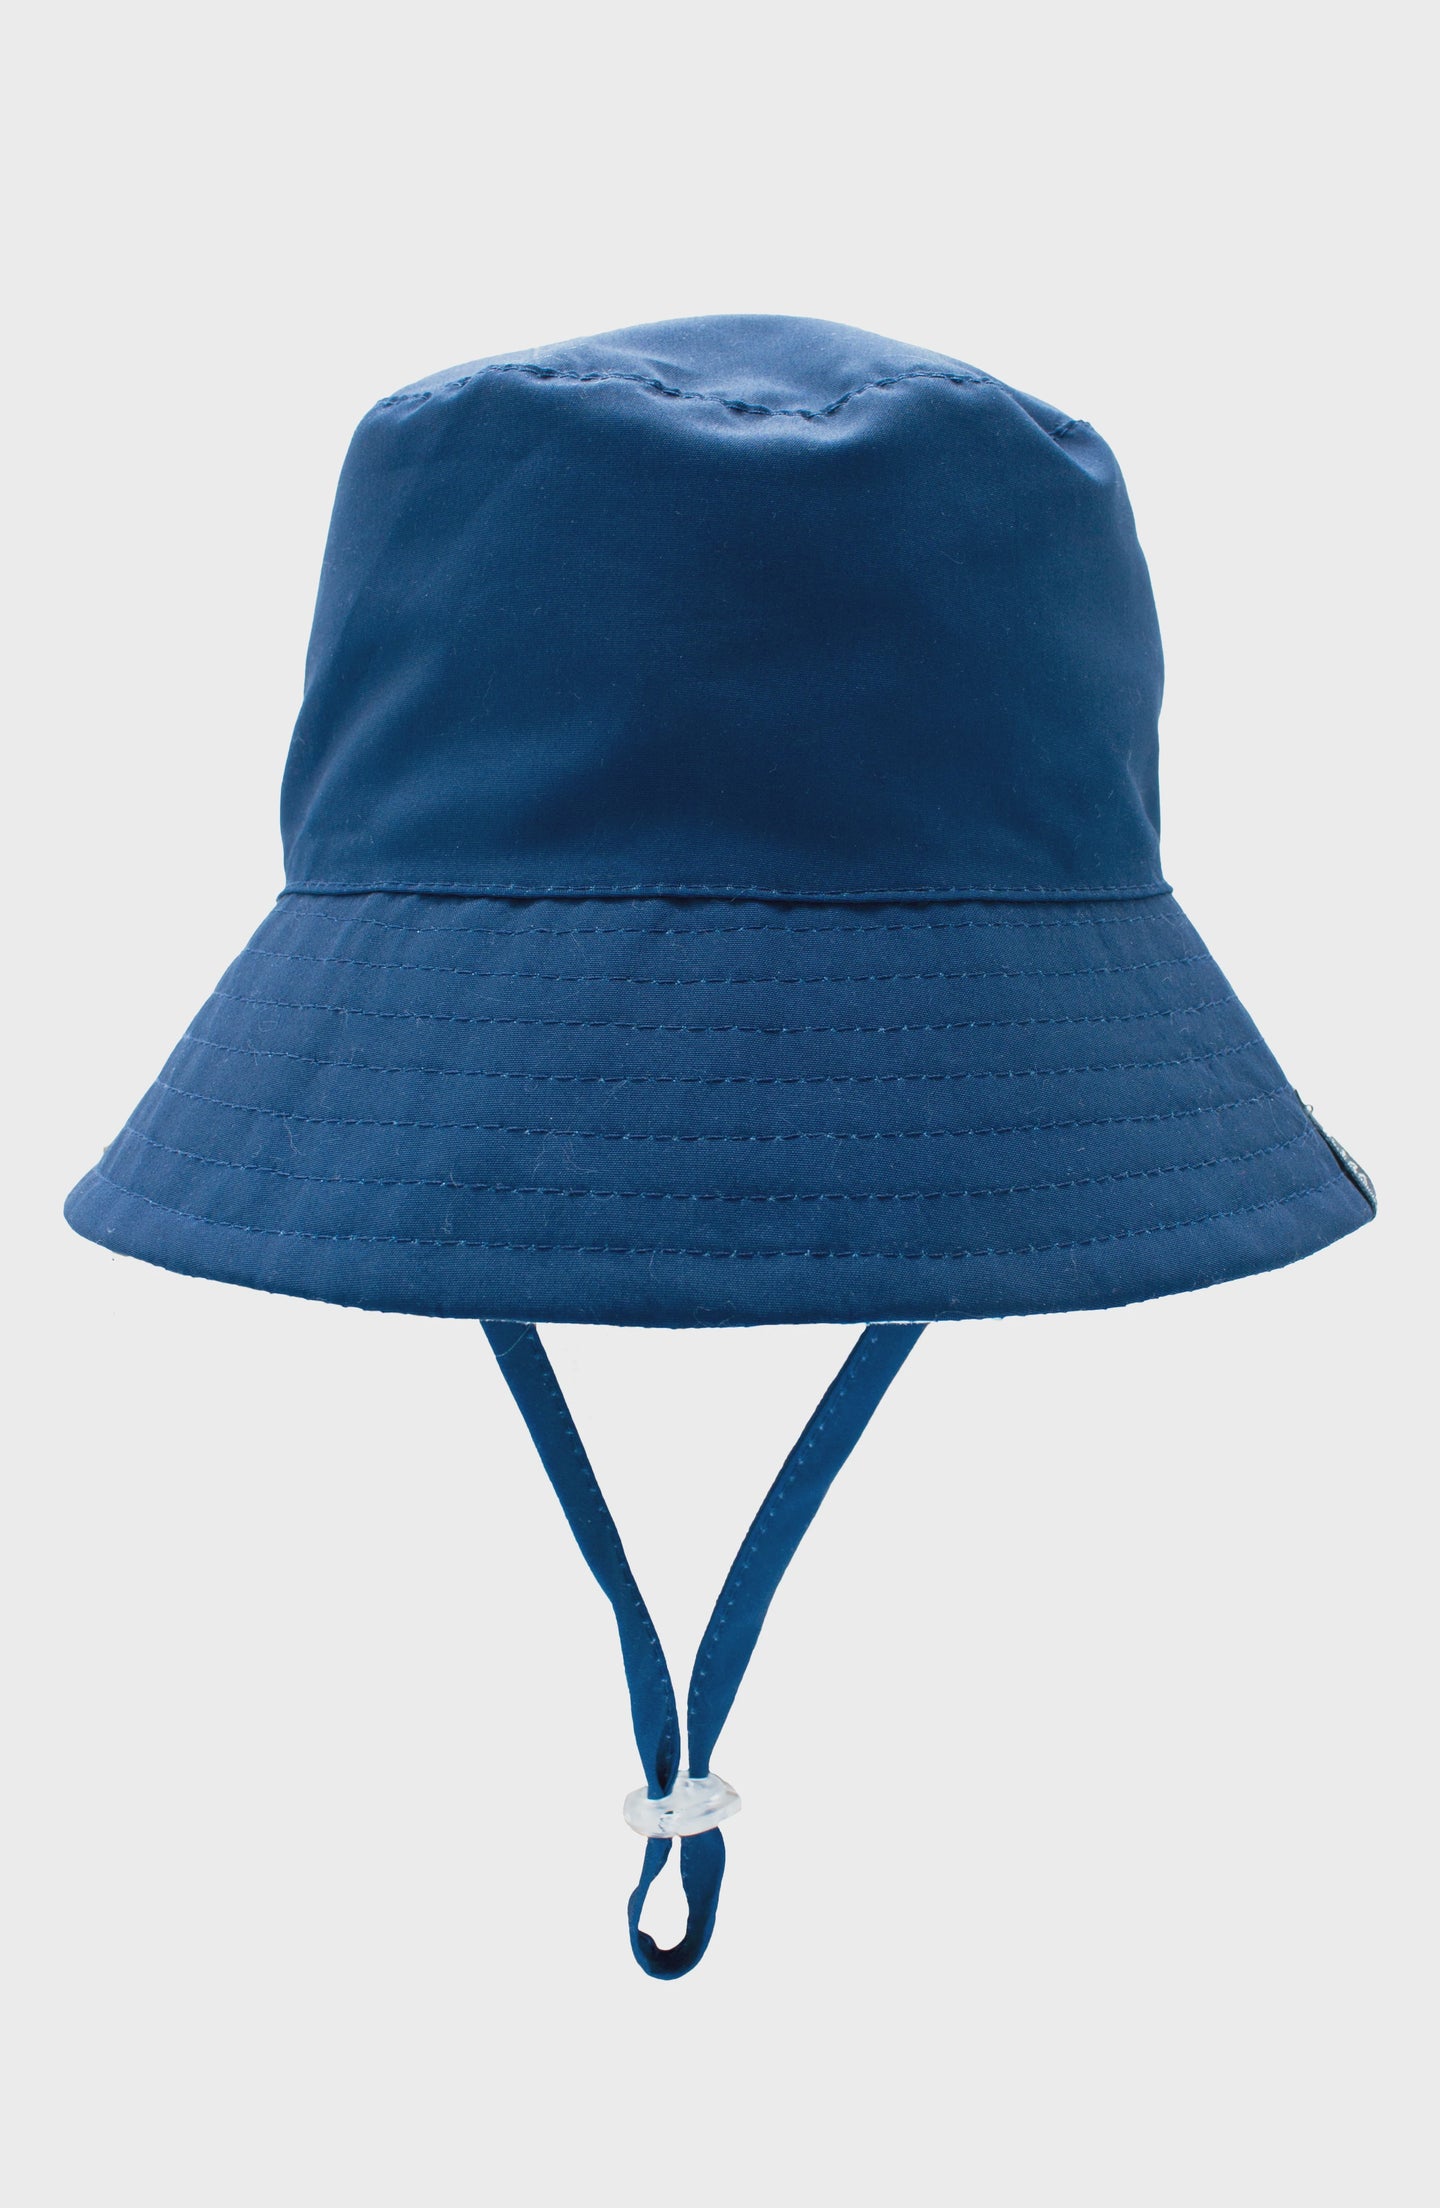 Feather 4 Arrow - Suns Out Reversible Bucket Hat - Navy